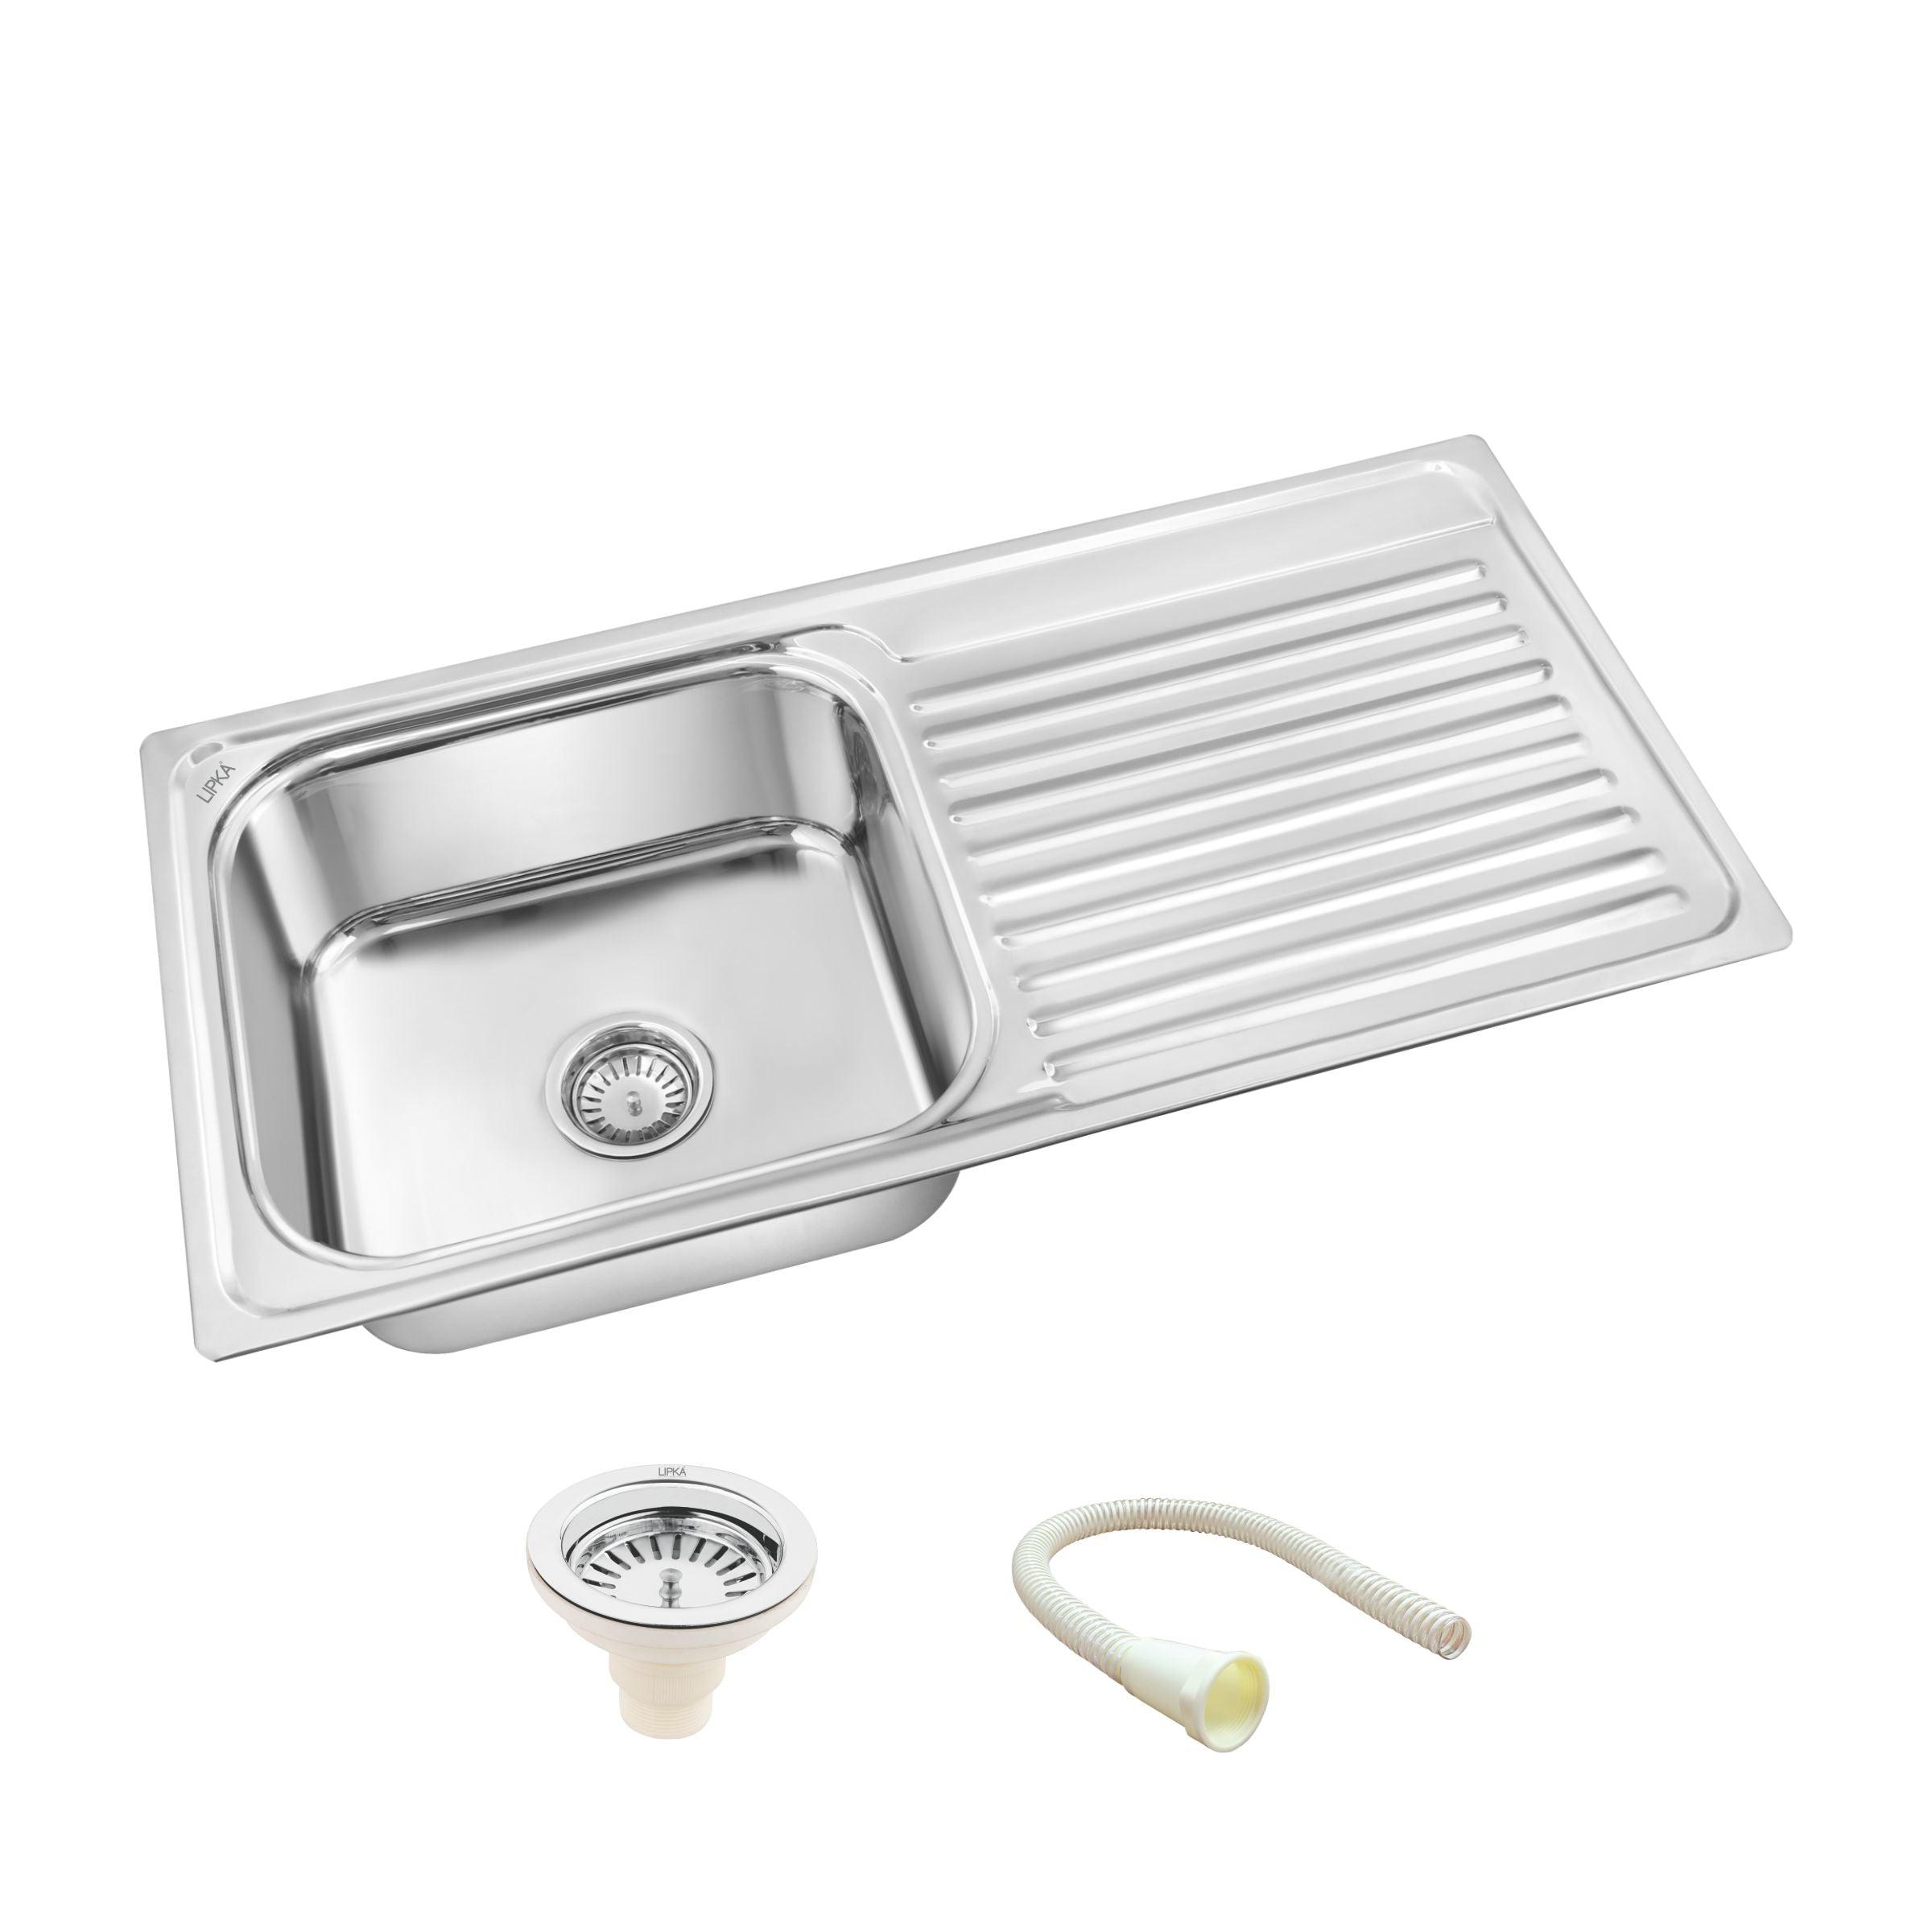 Square Single Bowl Kitchen Sink with Drainboard (37 x 18 x 8 Inches) - LIPKA - Lipka Home